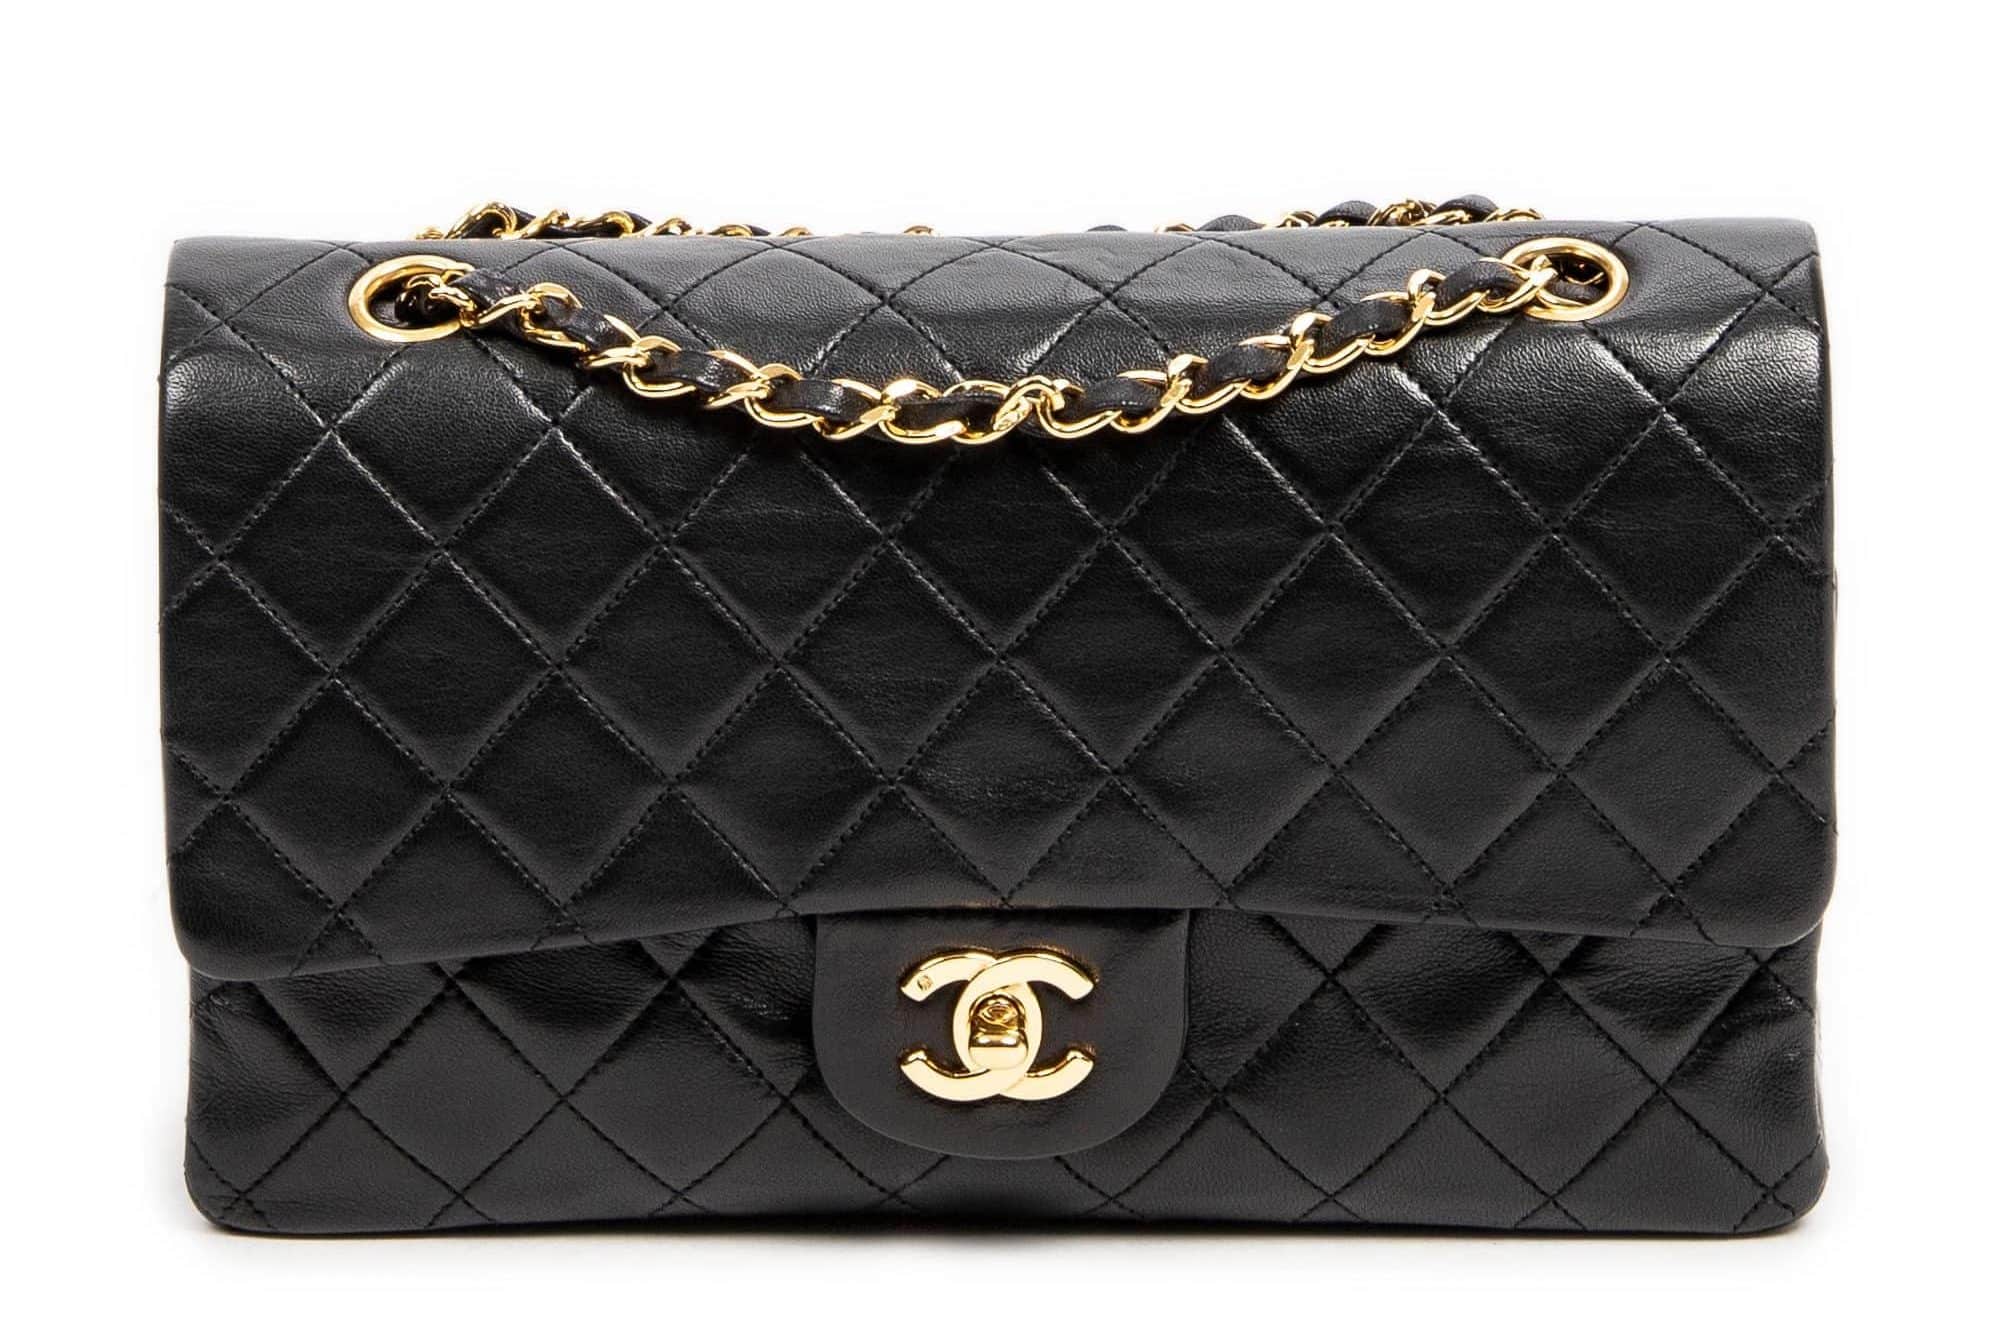 Chanel bags : a timeless investment - BrandCo Paris